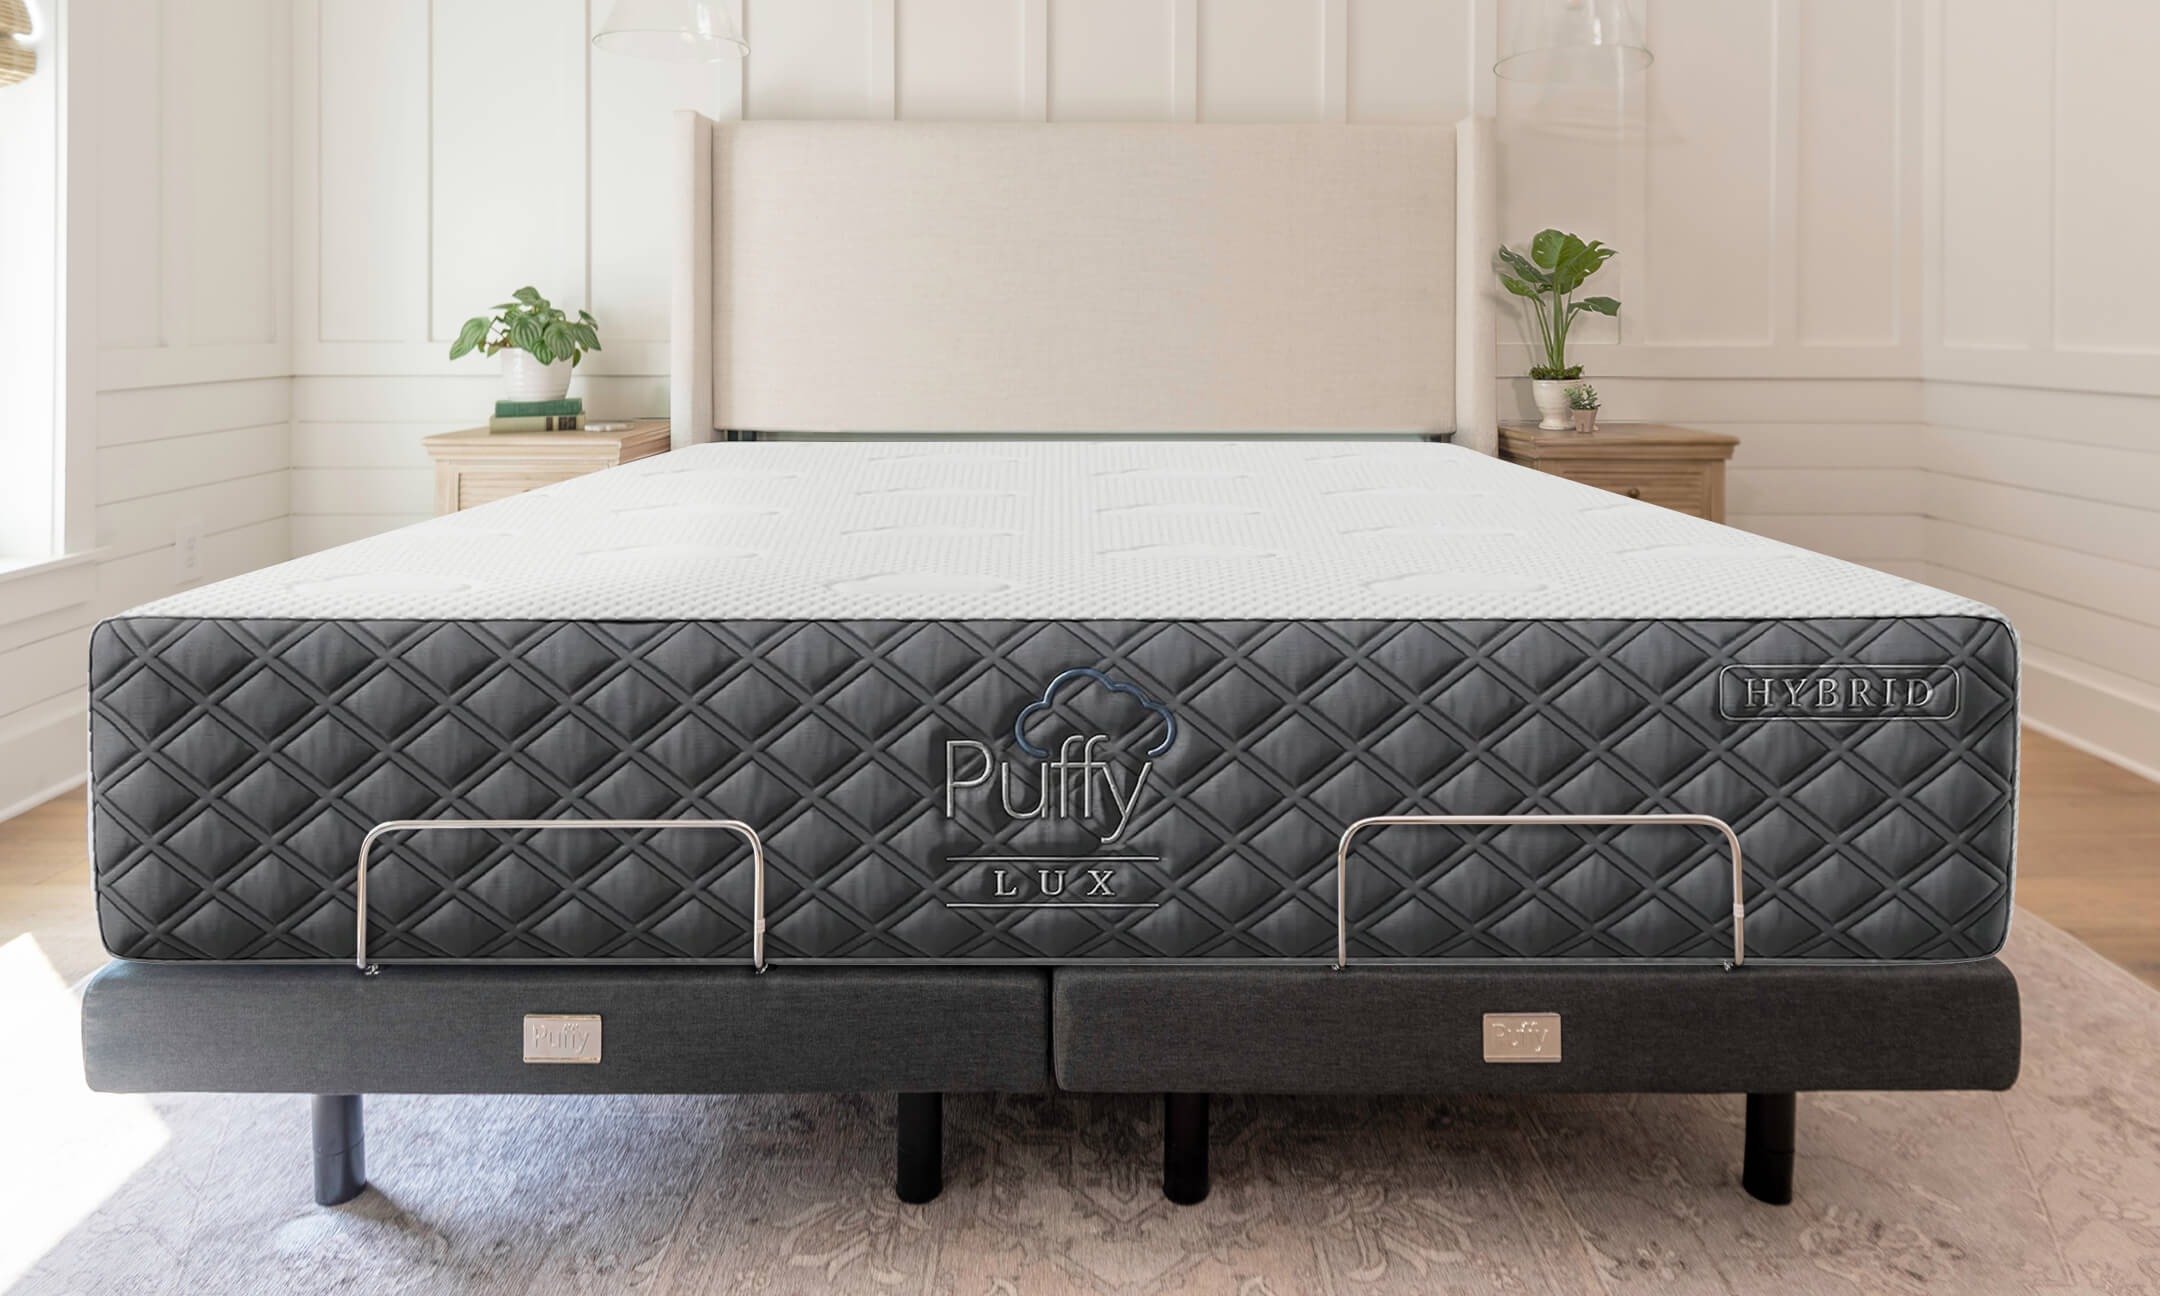 What is An Adjustable Bed Frame? Its Function, Versatility, and Aesthetics